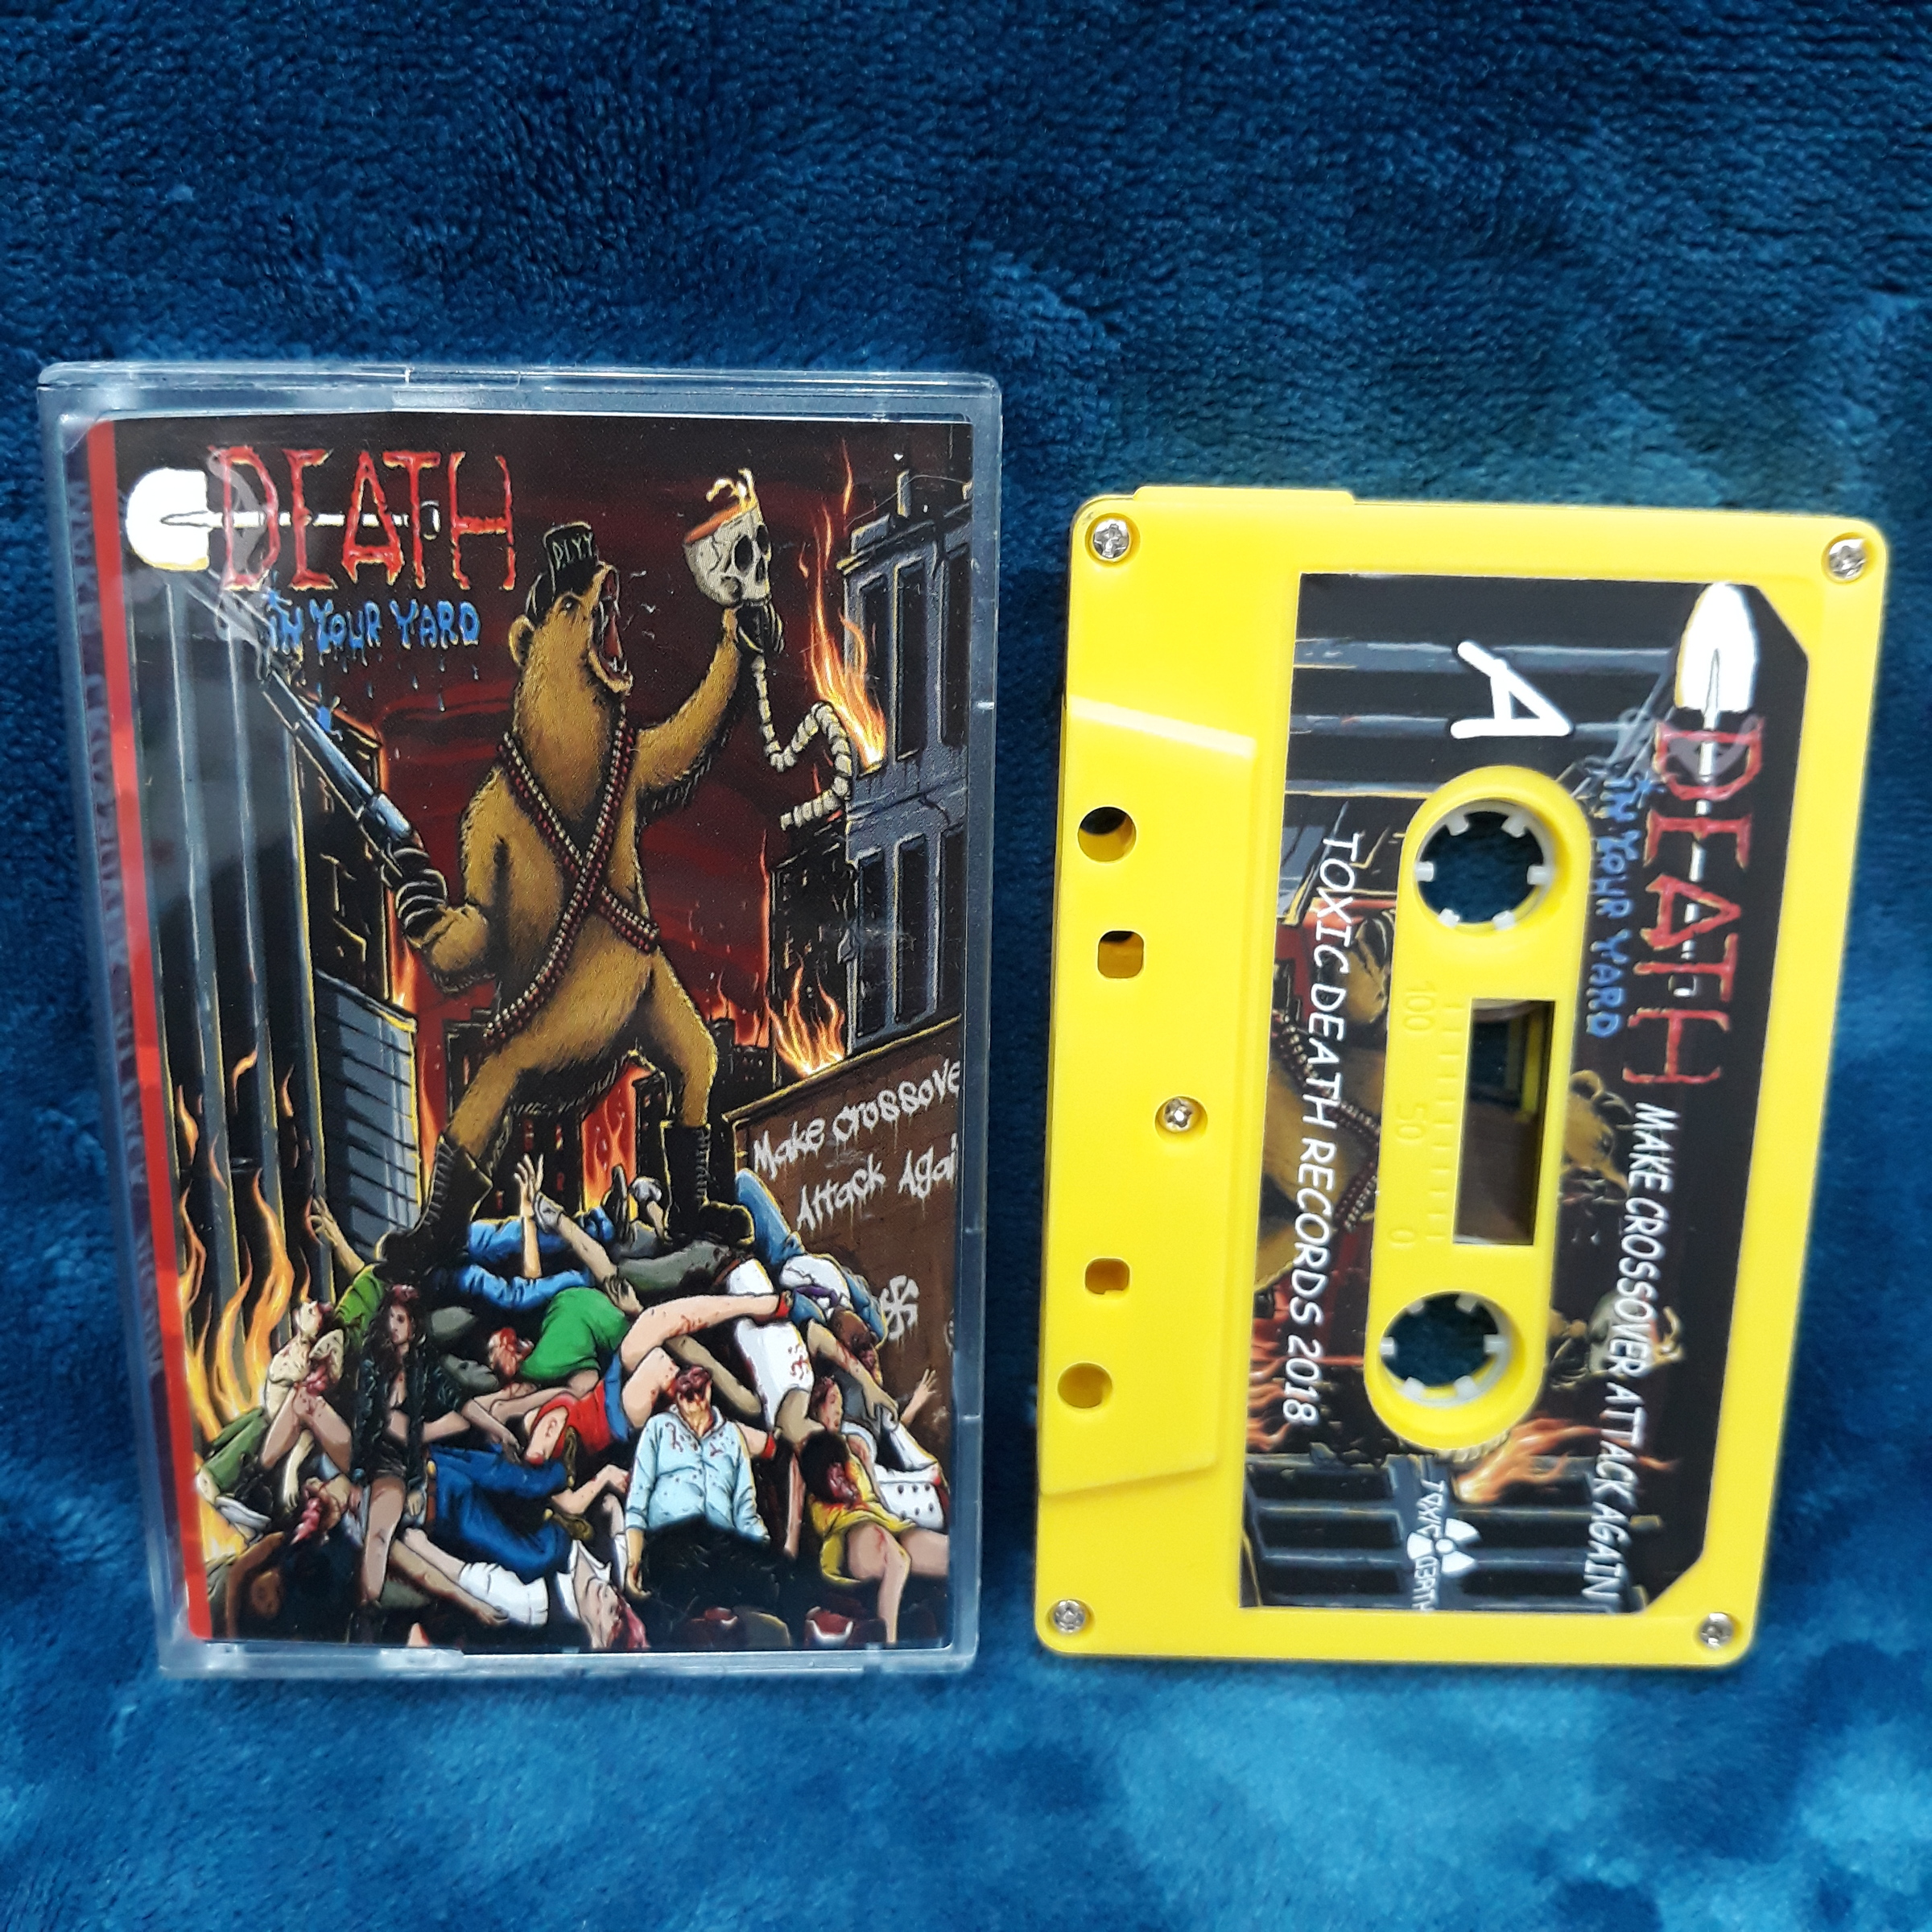 Death In Your Yard-Crossover Attack Again Tape